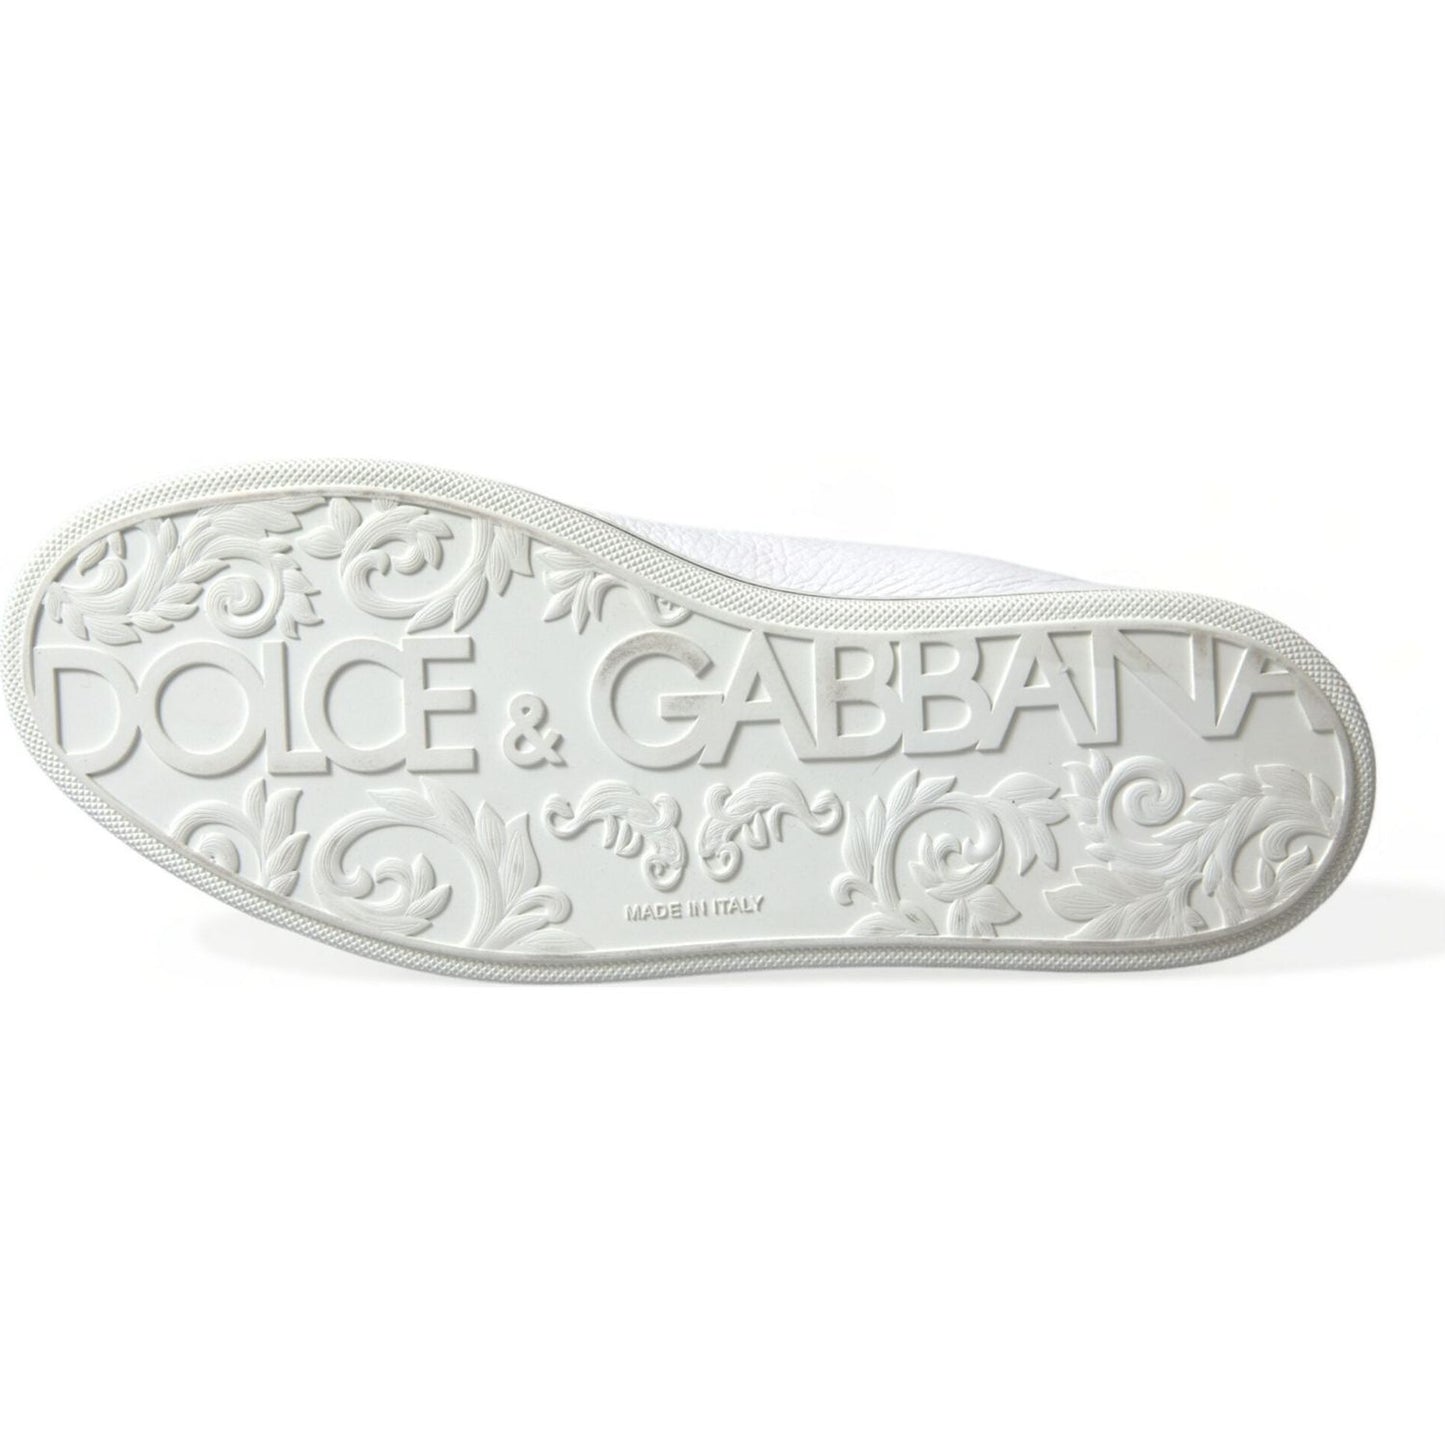 Dolce & Gabbana Elegant White Leather High Top Sneakers white-saint-tropez-high-top-men-sneakers-shoes